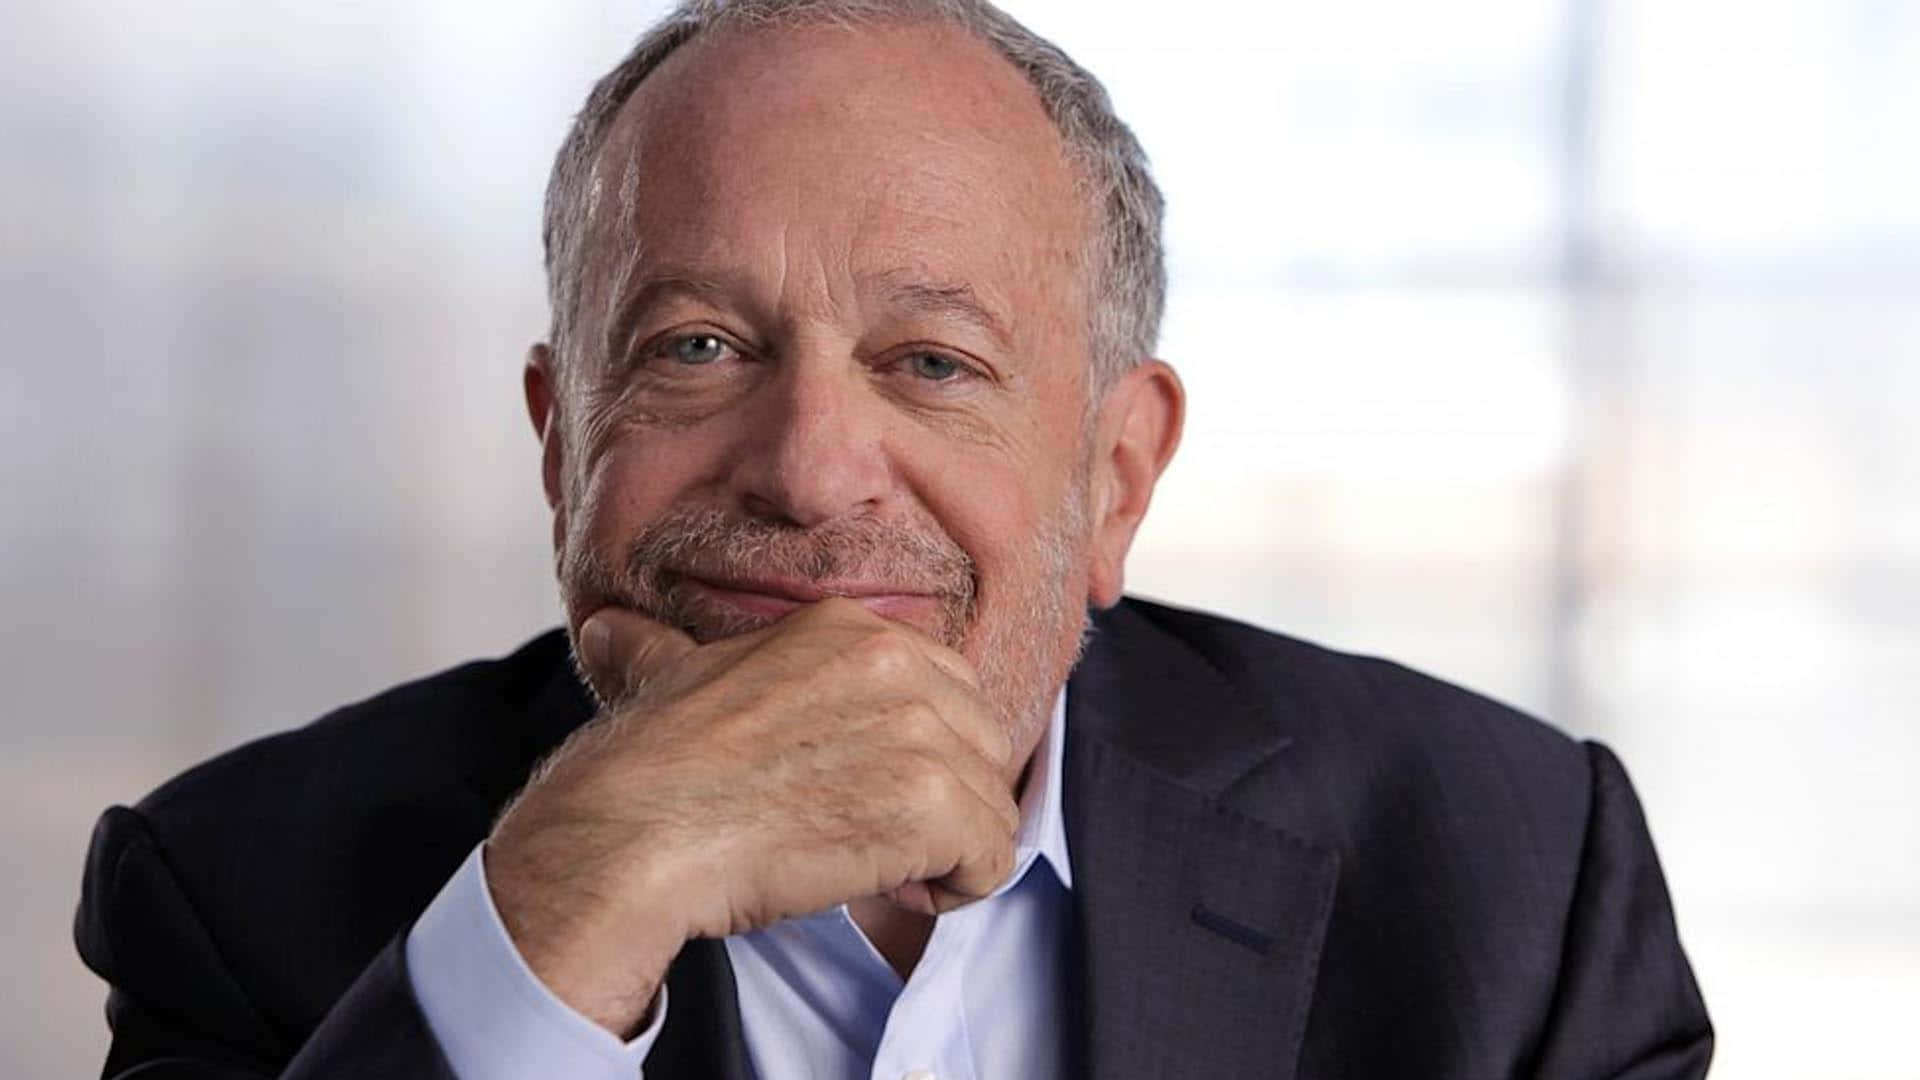 Robert Reich In A Formal Setting, Making A Point During A Discussion Wallpaper